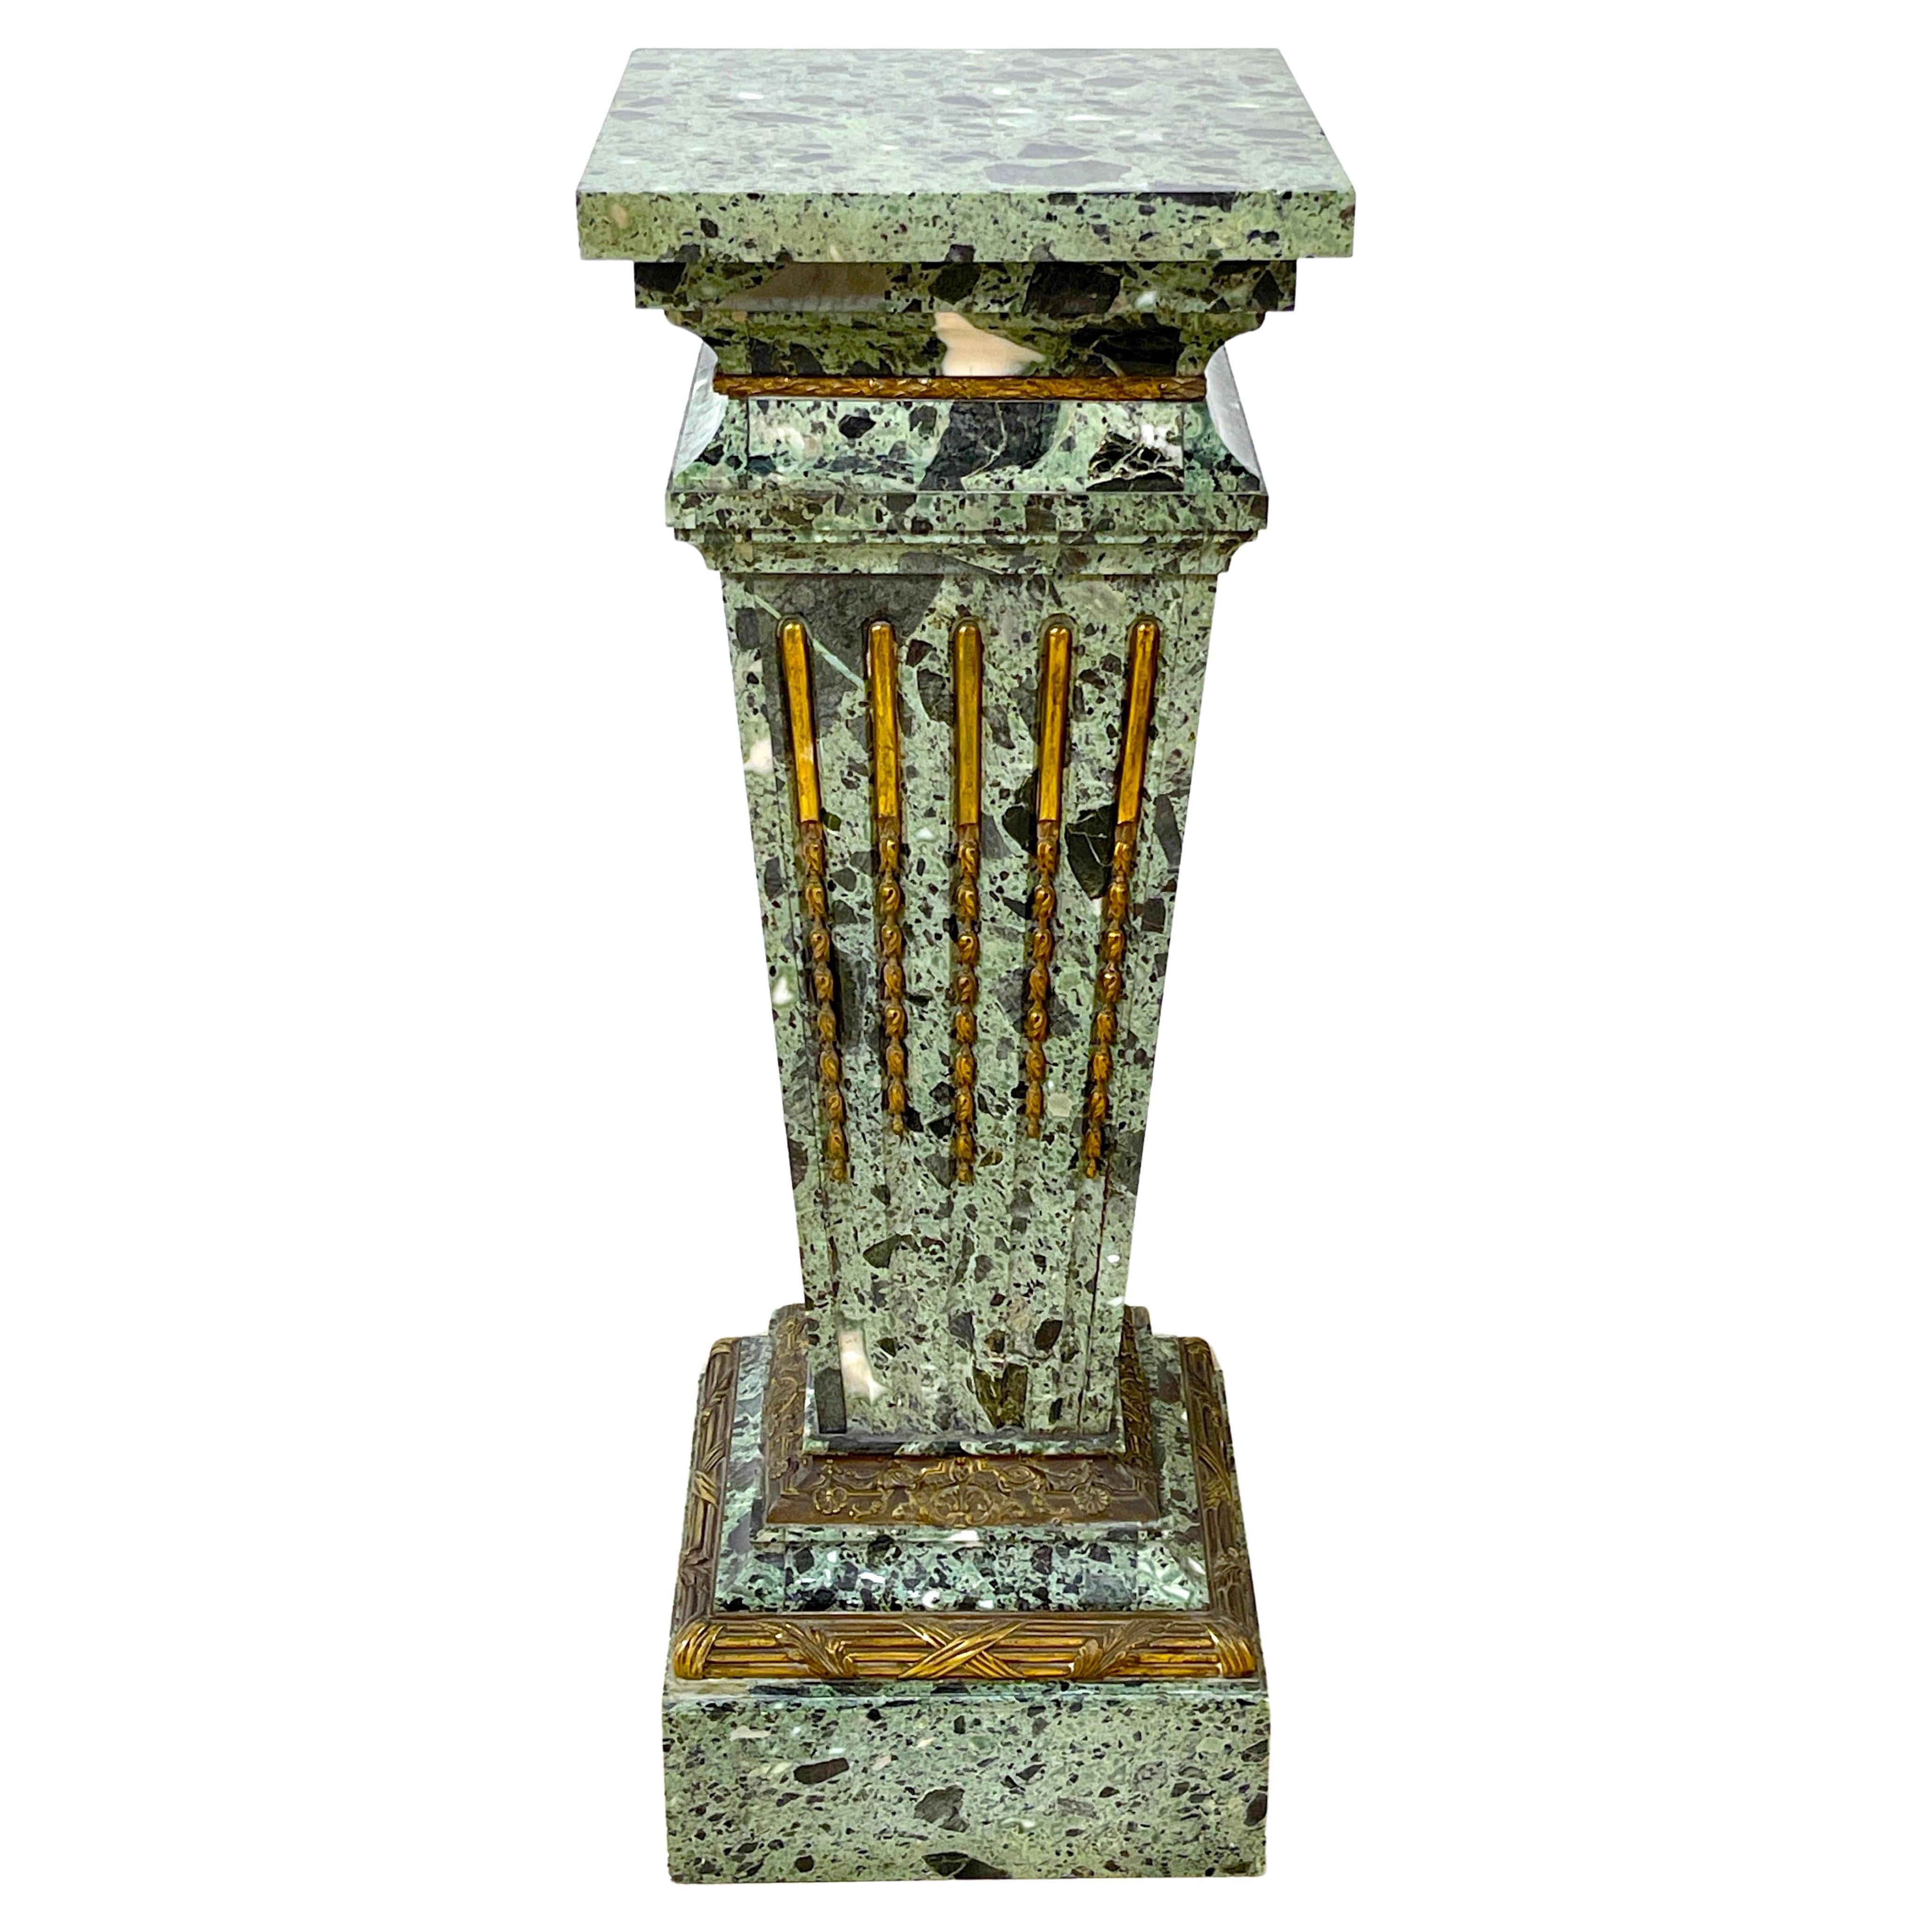 Magnificent French Neoclassical Ormolu Mounted Verdigris Marble Pedestal For Sale